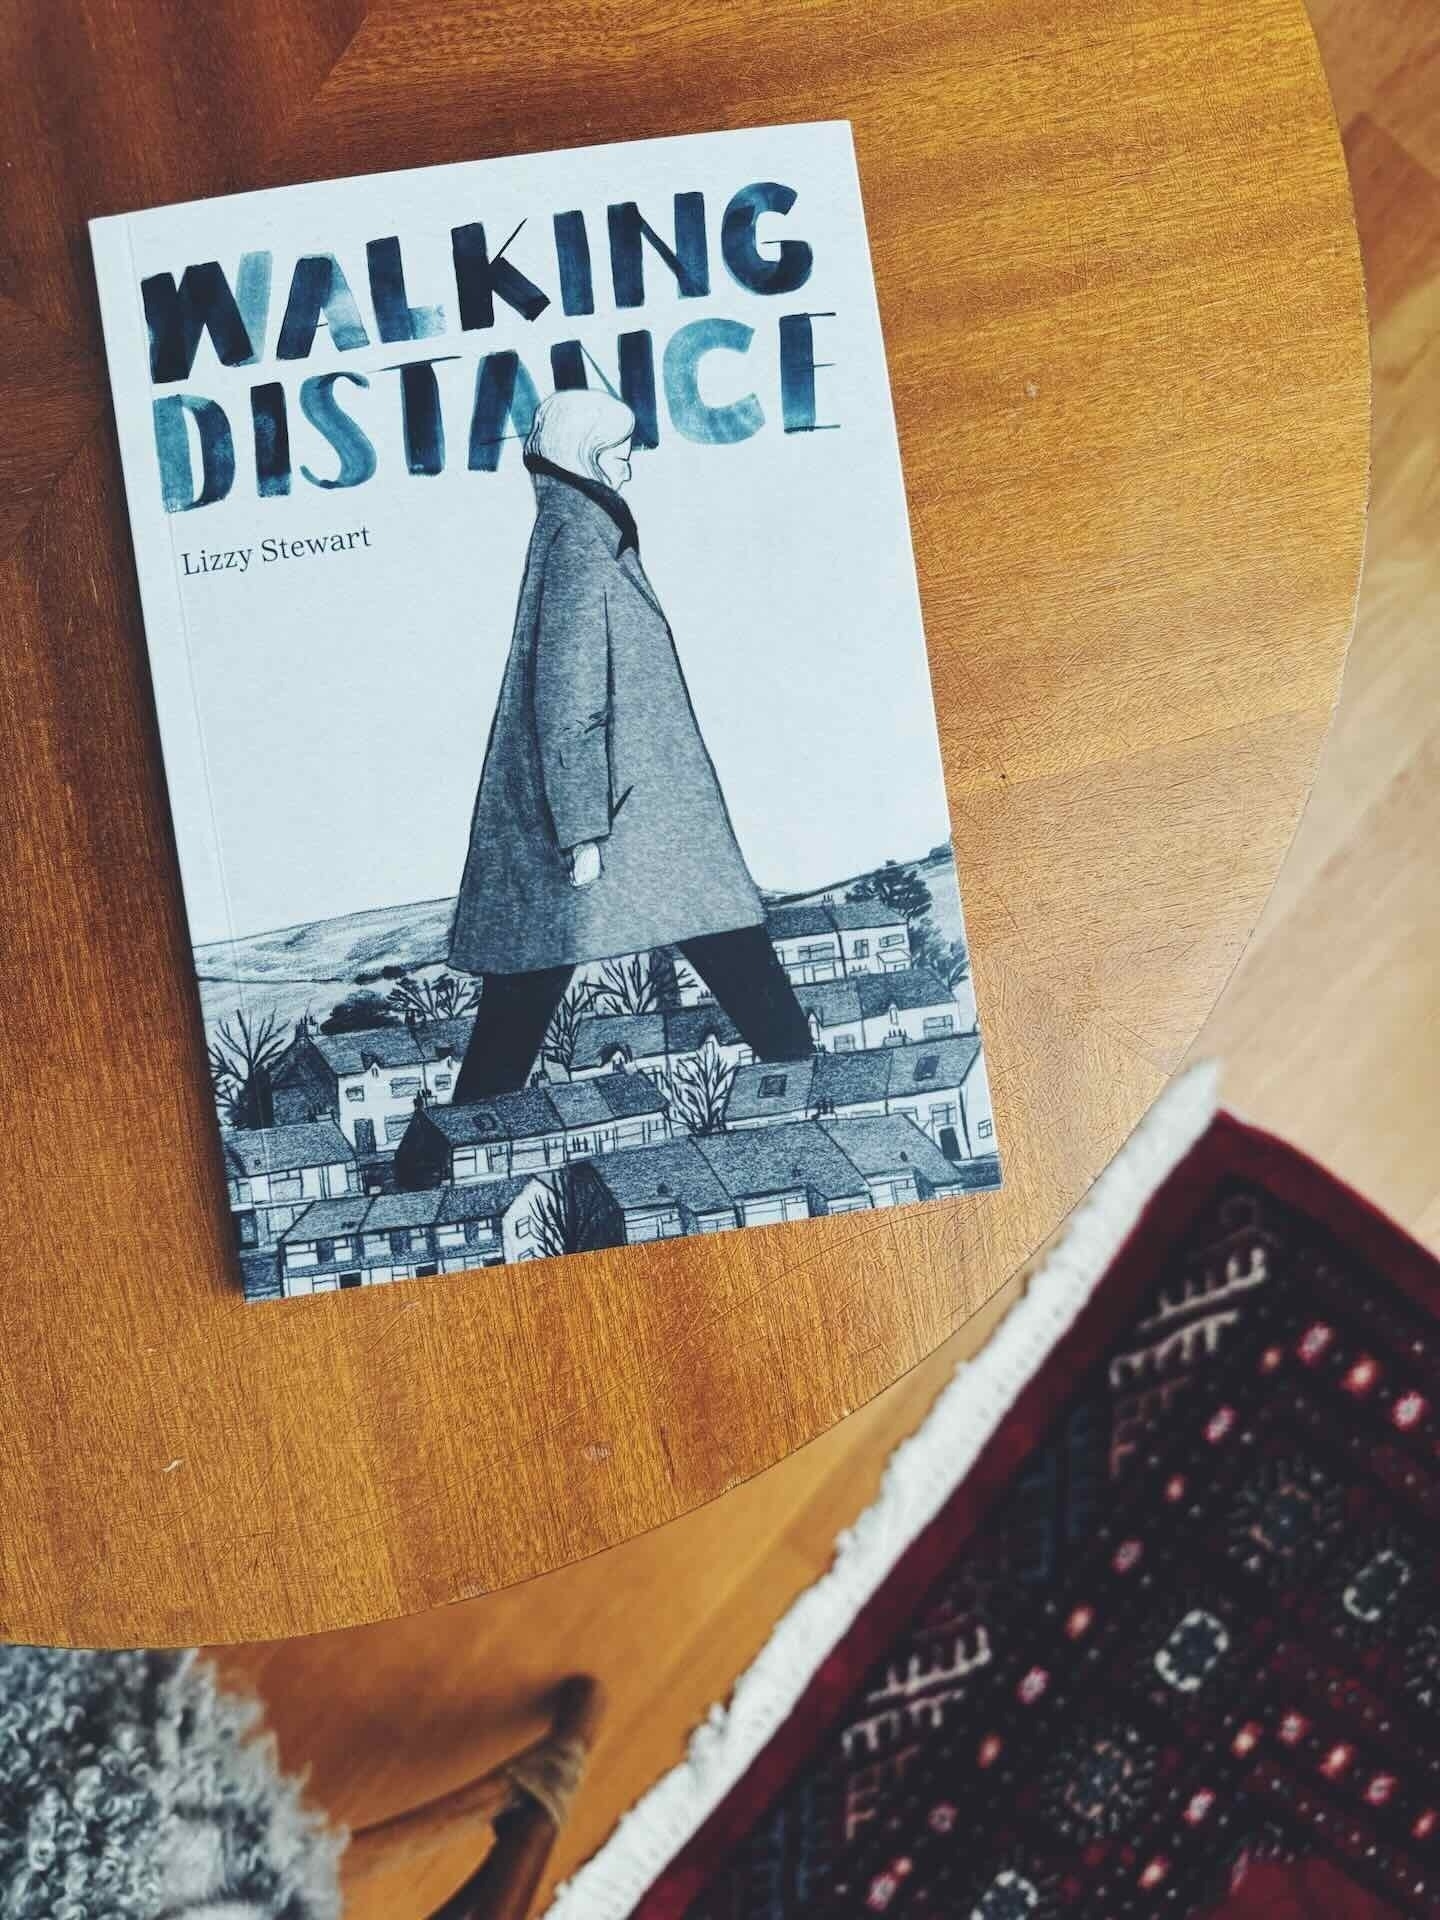 The book Walking Distance by Lizzy Stewart on a wooden table. The cover illustration depicts a large woman in a coat walking over a small town.